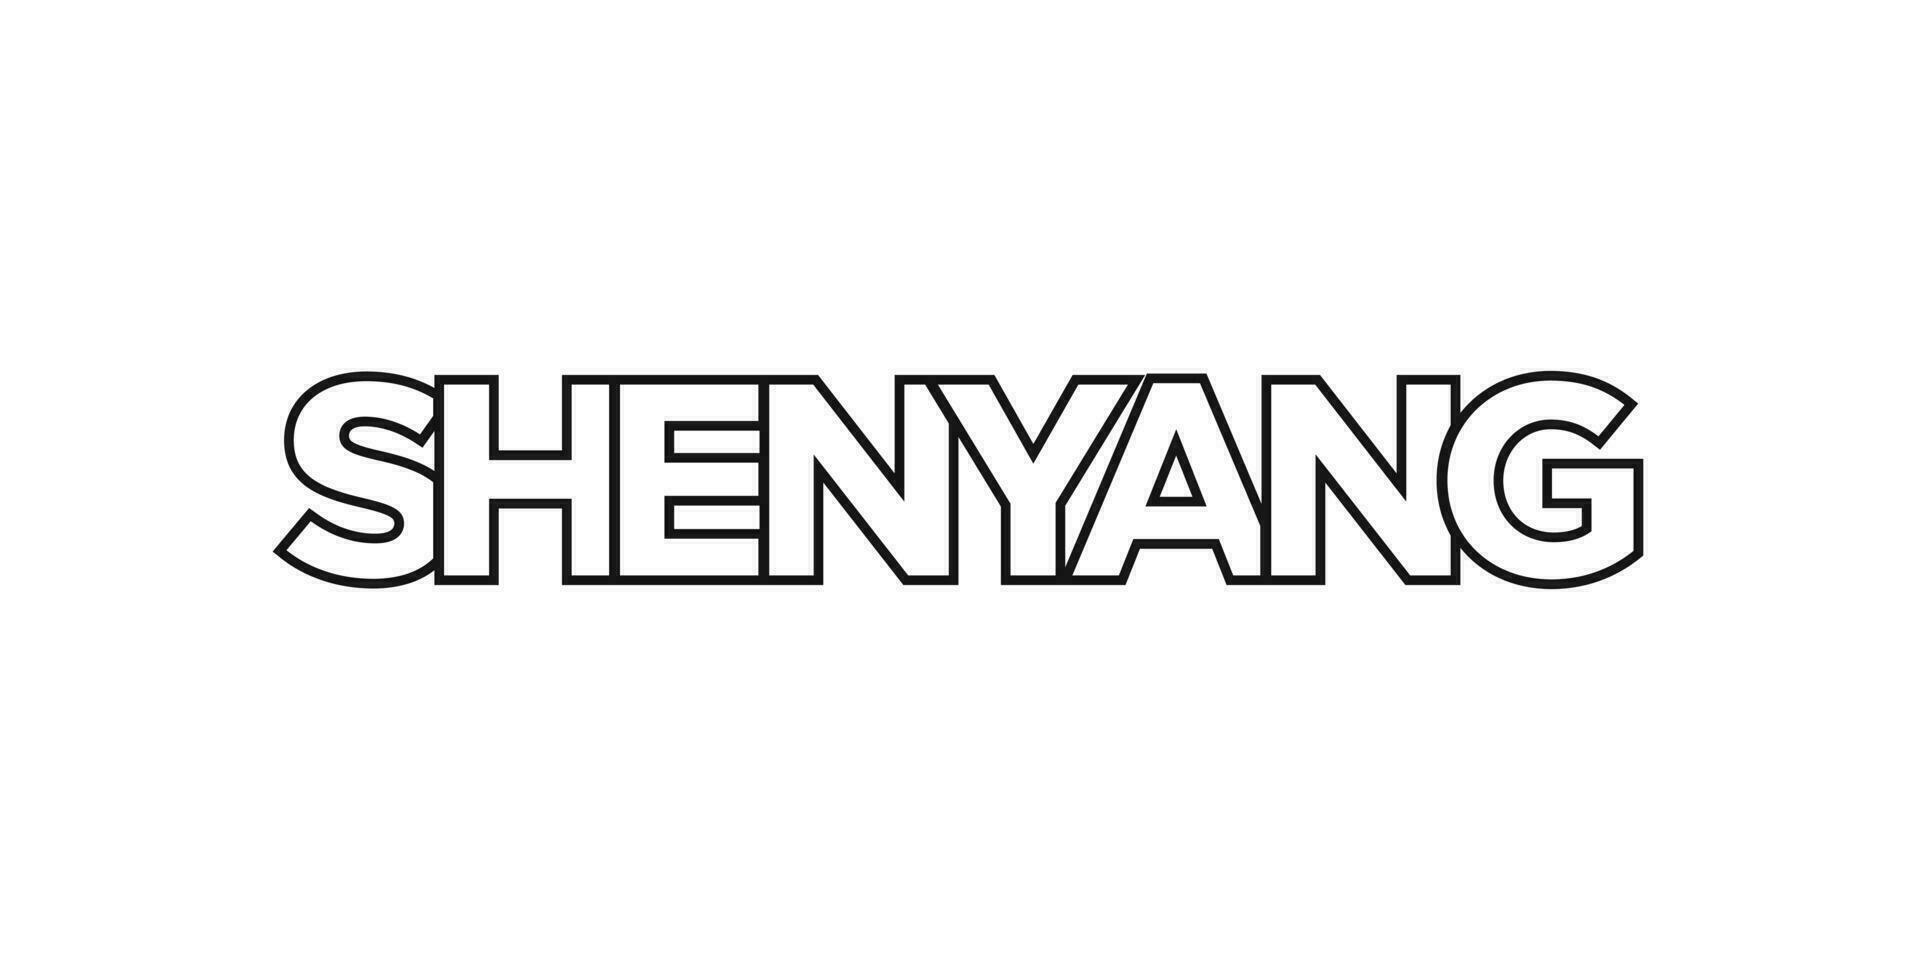 Shenyang in the China emblem. The design features a geometric style, vector illustration with bold typography in a modern font. The graphic slogan lettering.